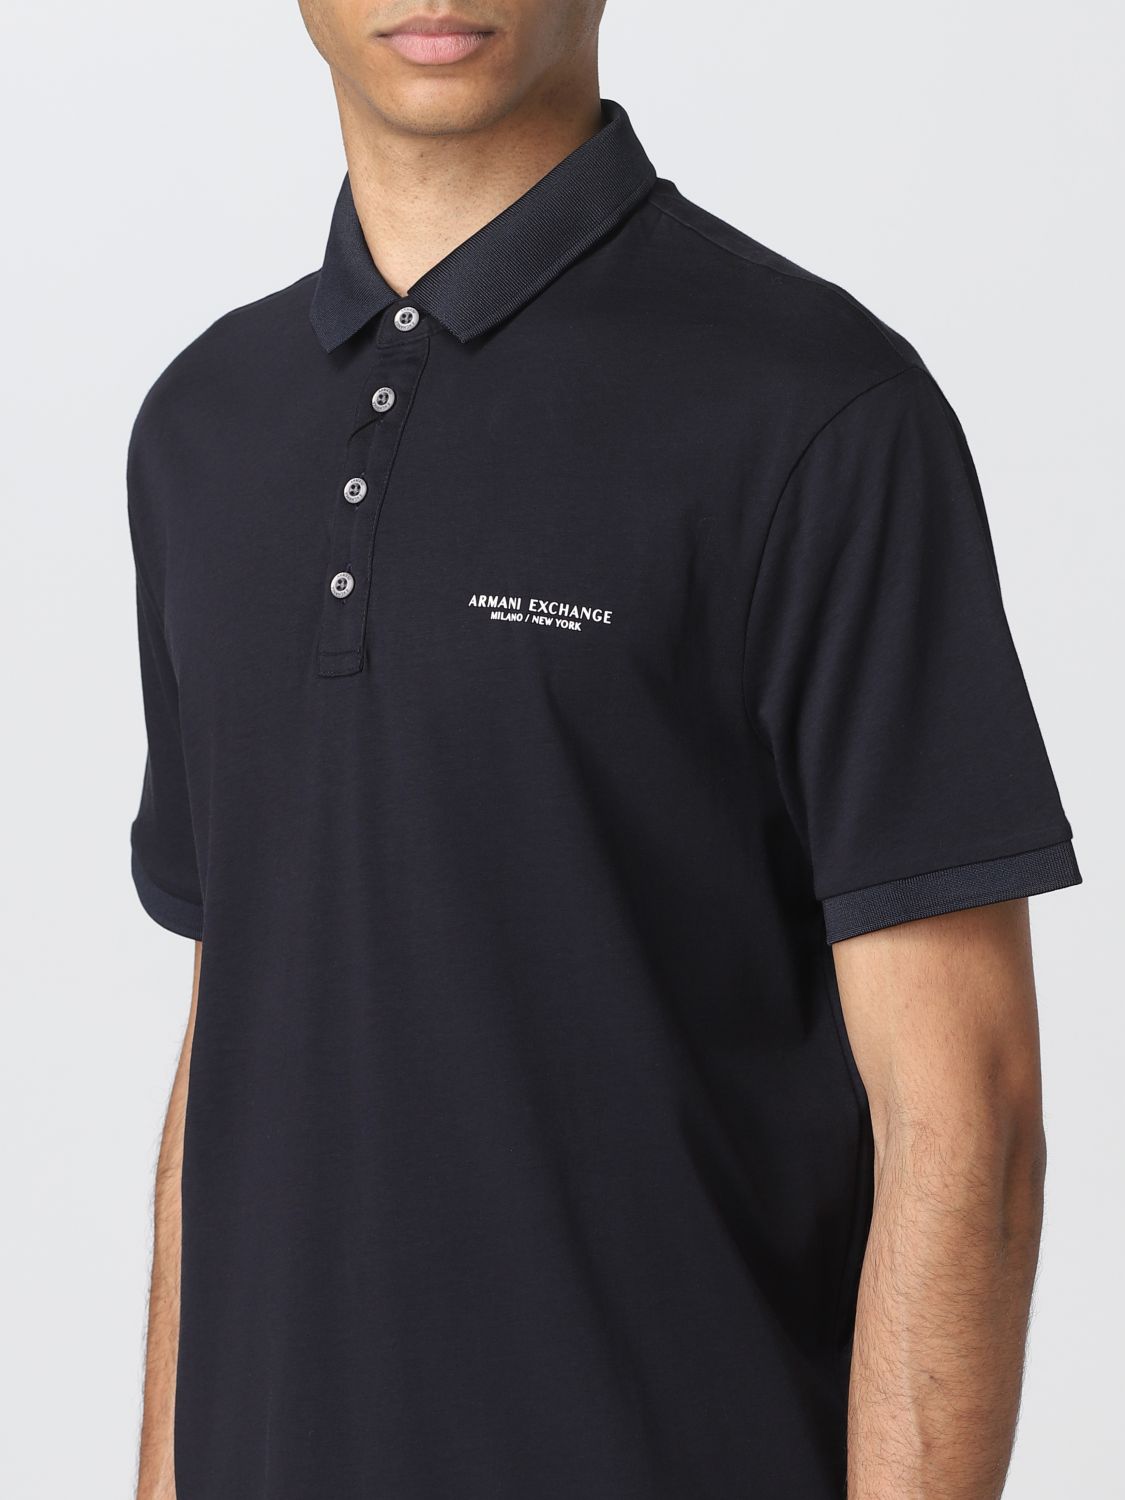 Armani Exchange Polo Sale Online Offer, Save 57% 